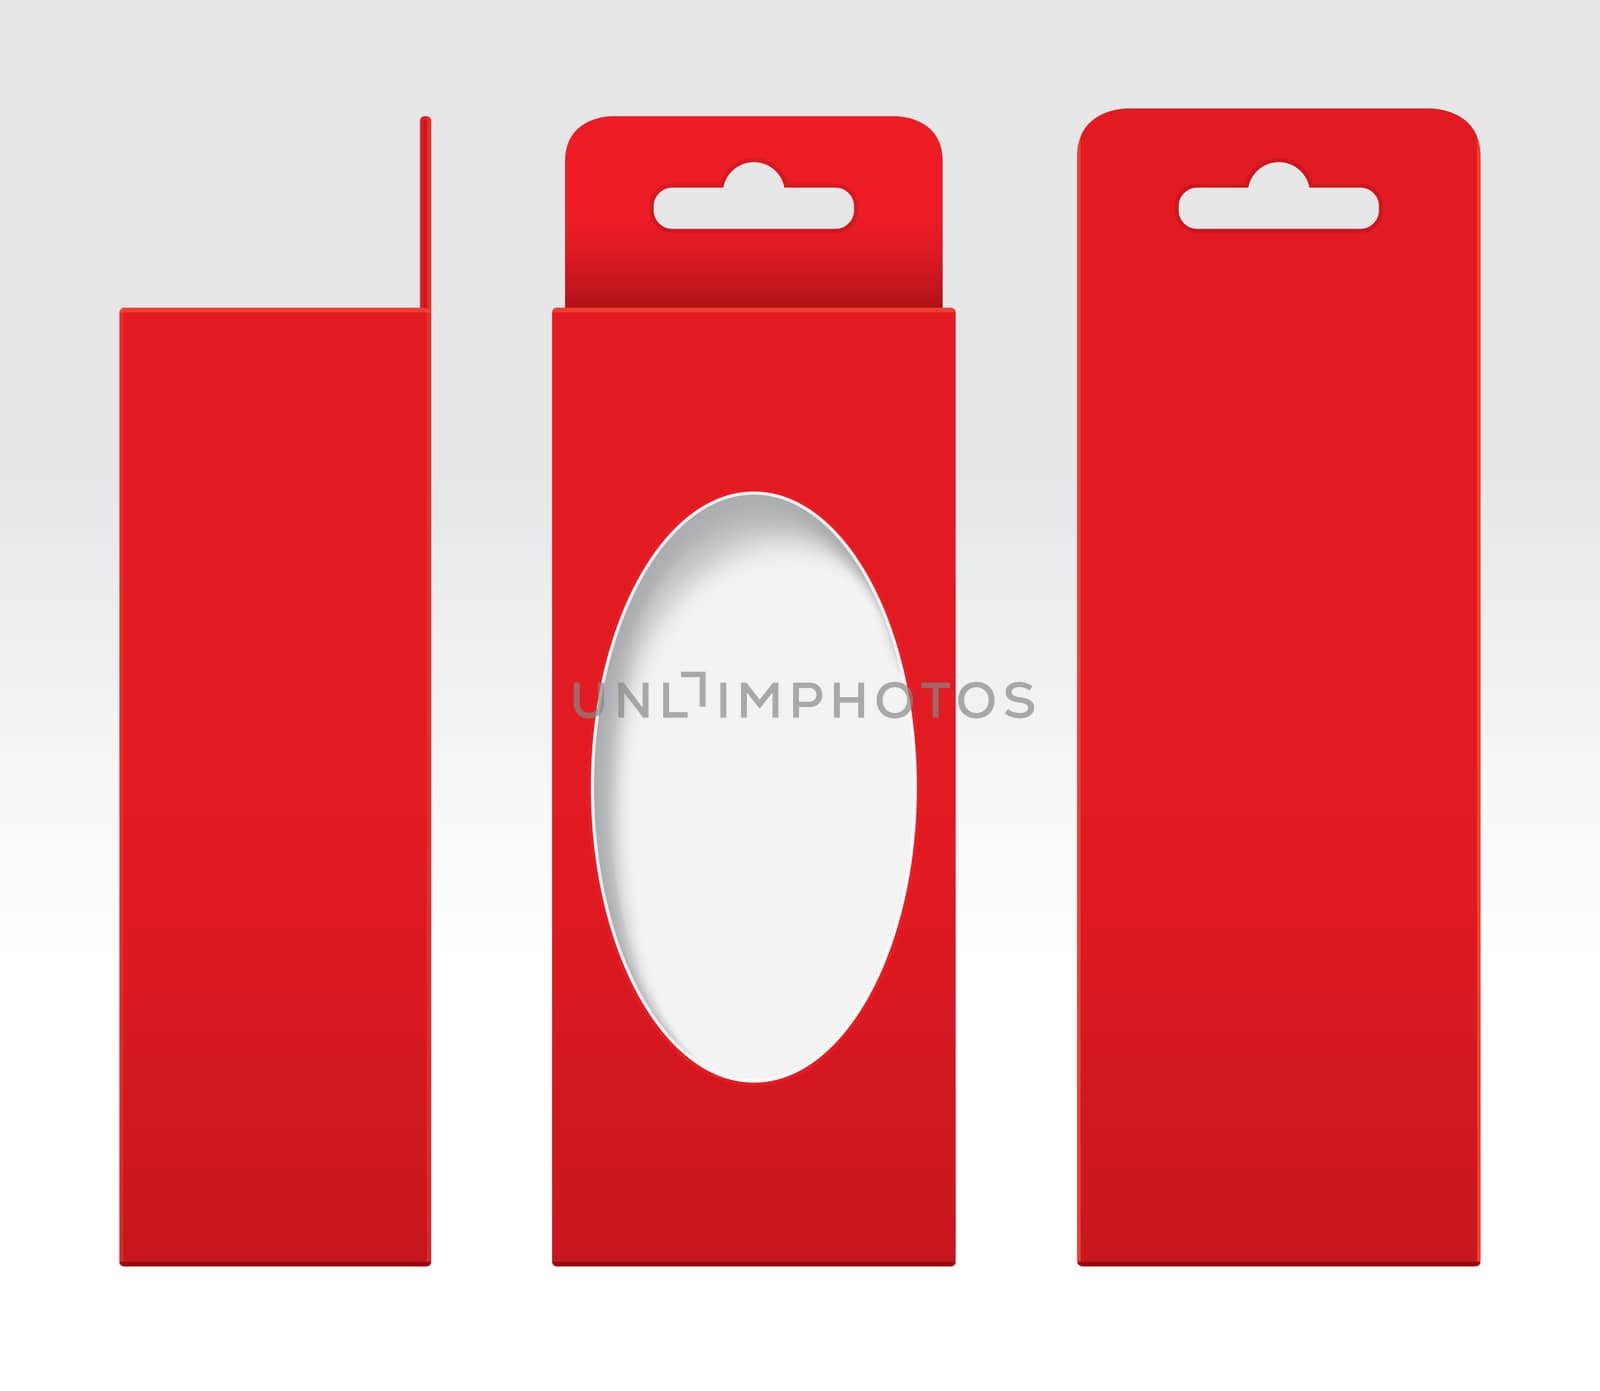 Hanging Red Box window cut out Packaging Template blank, Empty Box red Cardboard, Gift Boxes red kraft Package Carton, Premium red box empty by cgdeaw